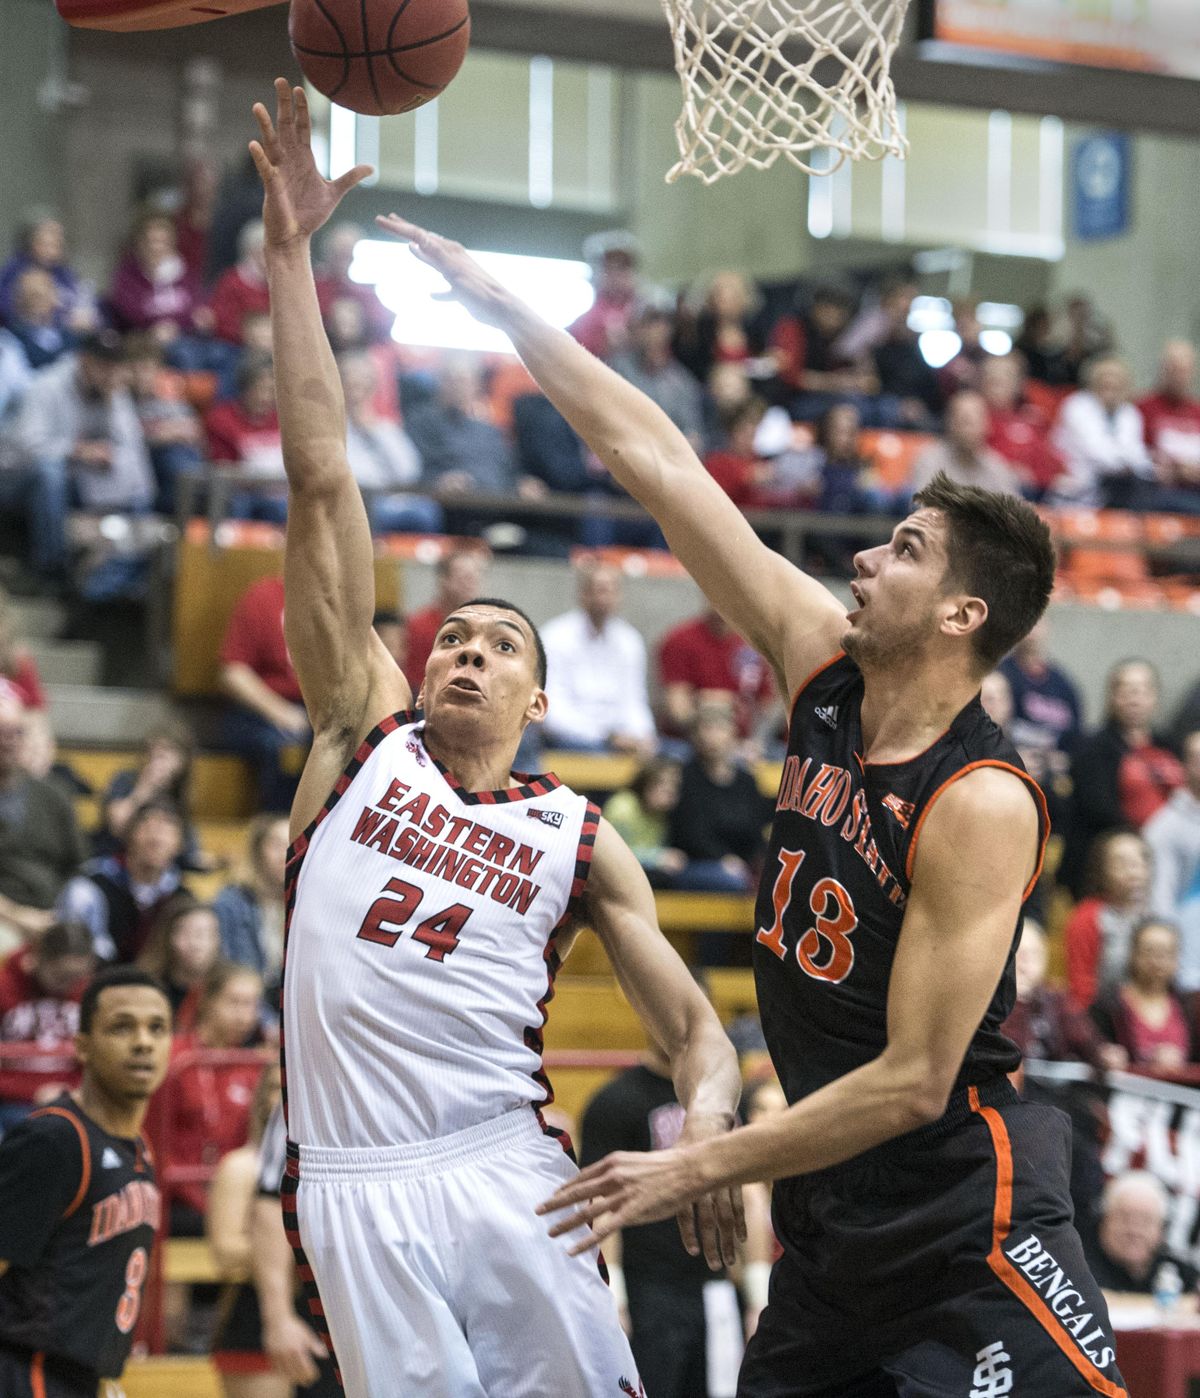 Eastern Washington forward Jacob Wiley powers past Idaho State center Novak Topalovic for a basket in the first half, Feb. 25, 2017, in Cheney. (Dan Pelle / The Spokesman-Review)